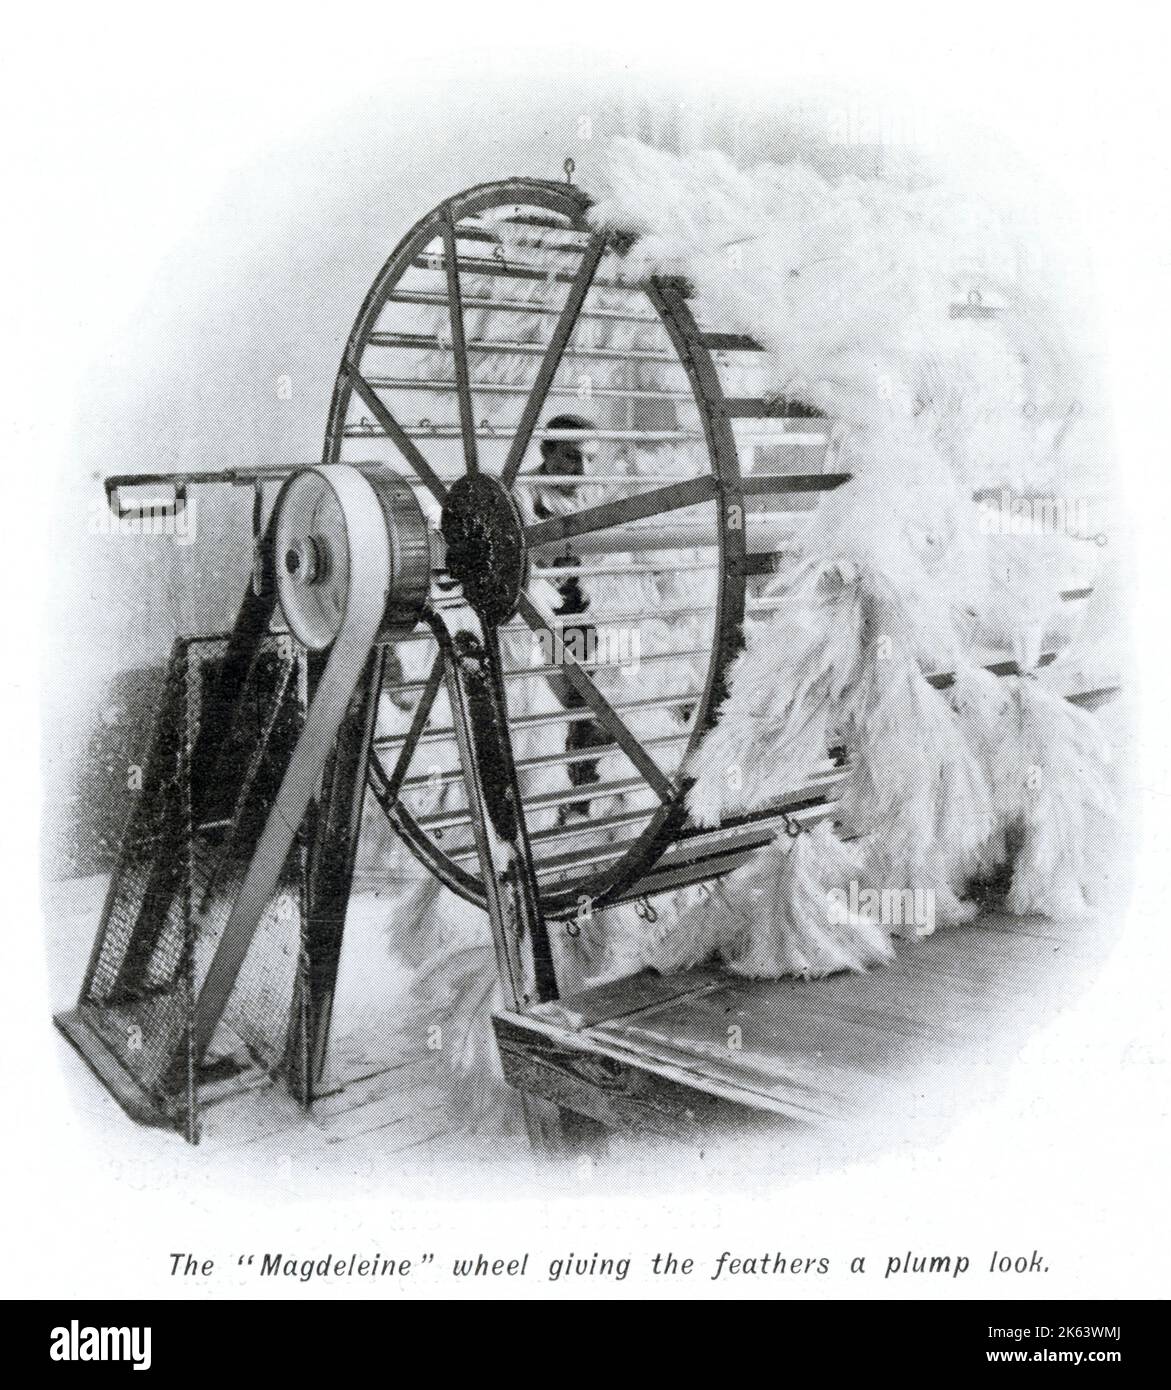 After the ostrich feathers complete there journey from Cape Town, South Africa, bales of cruelly plucked feathers arrive by boat to London, the Worlds feather market. Still with flesh torn and bleeding tips, feathers were washed and then dried by a 'madeleine' wheel to give them a plump appearance, shown in the photograph. Before sold at auction to buyers from Paris, Vienna and America. Stock Photo